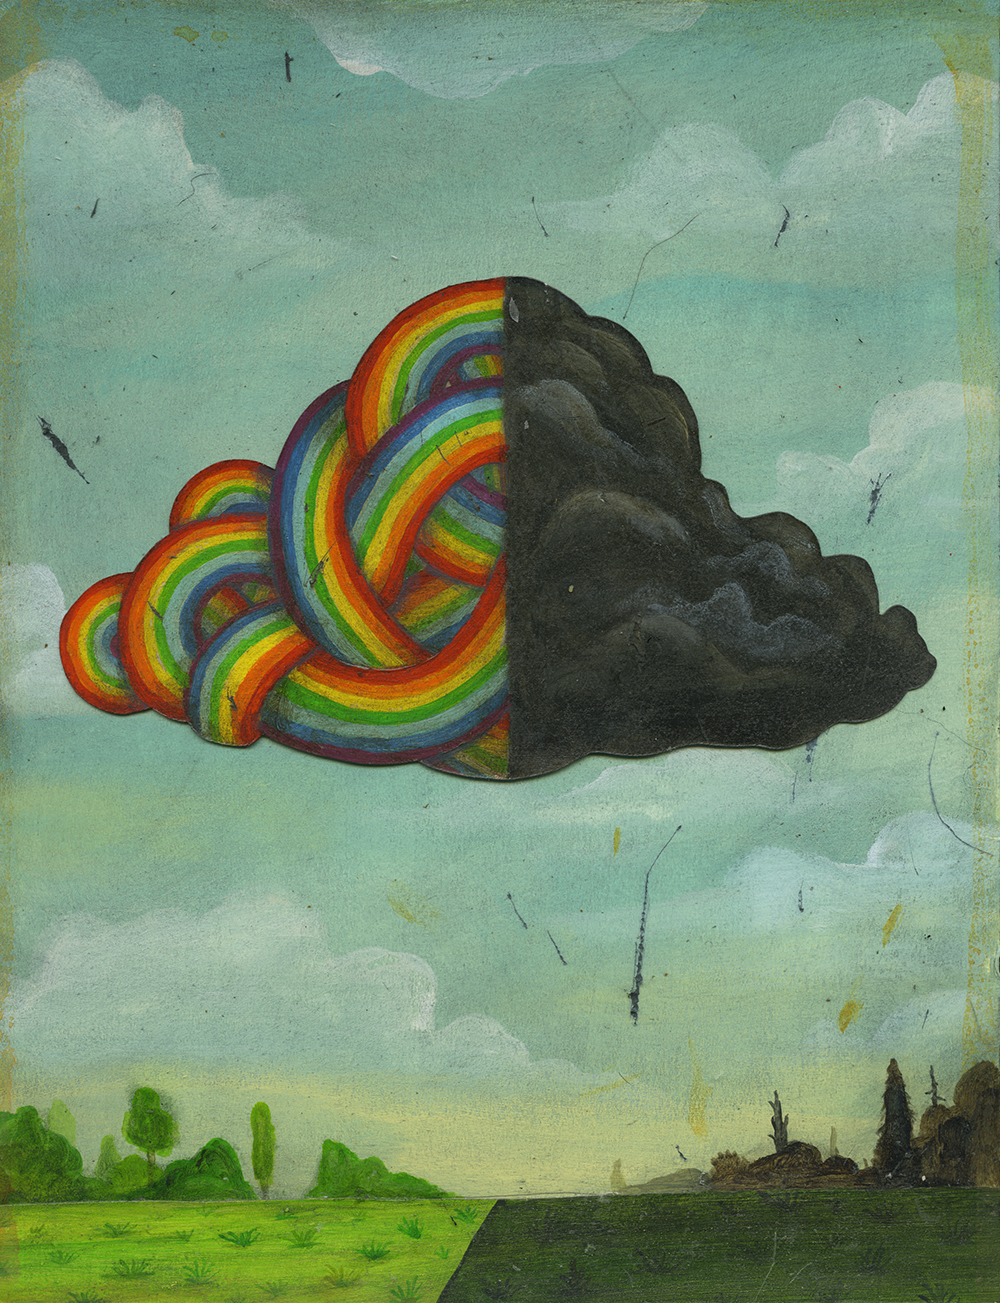 An illustration of a cloud and rainbow twisting together above a landscape showing the complexity of inflammation.